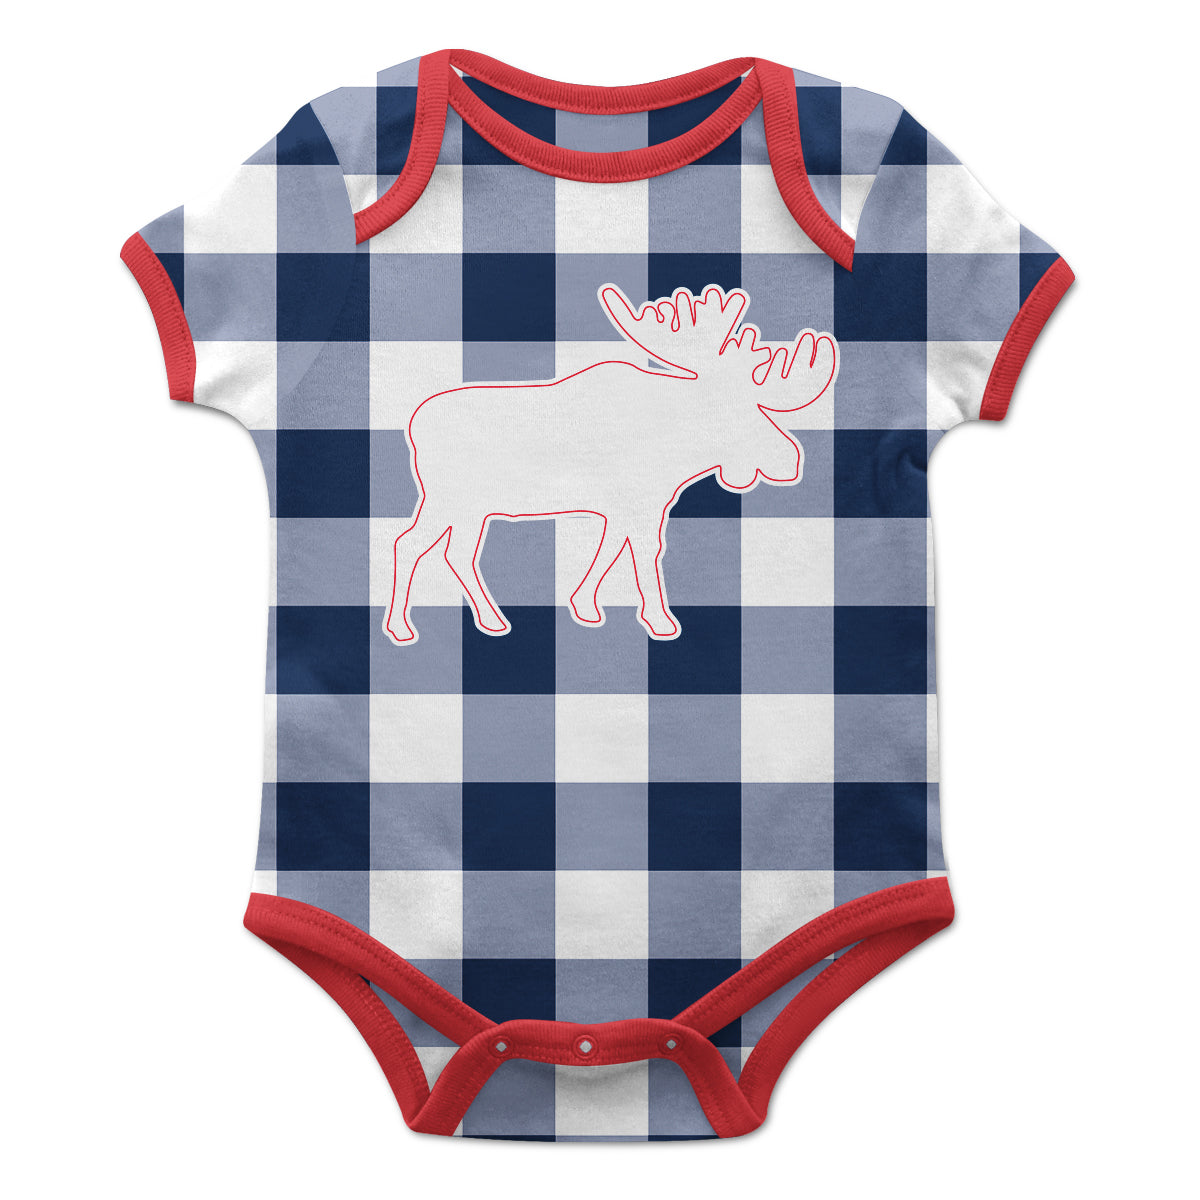 Boys blue and white moose short sleeve onesie - Wimziy&Co.